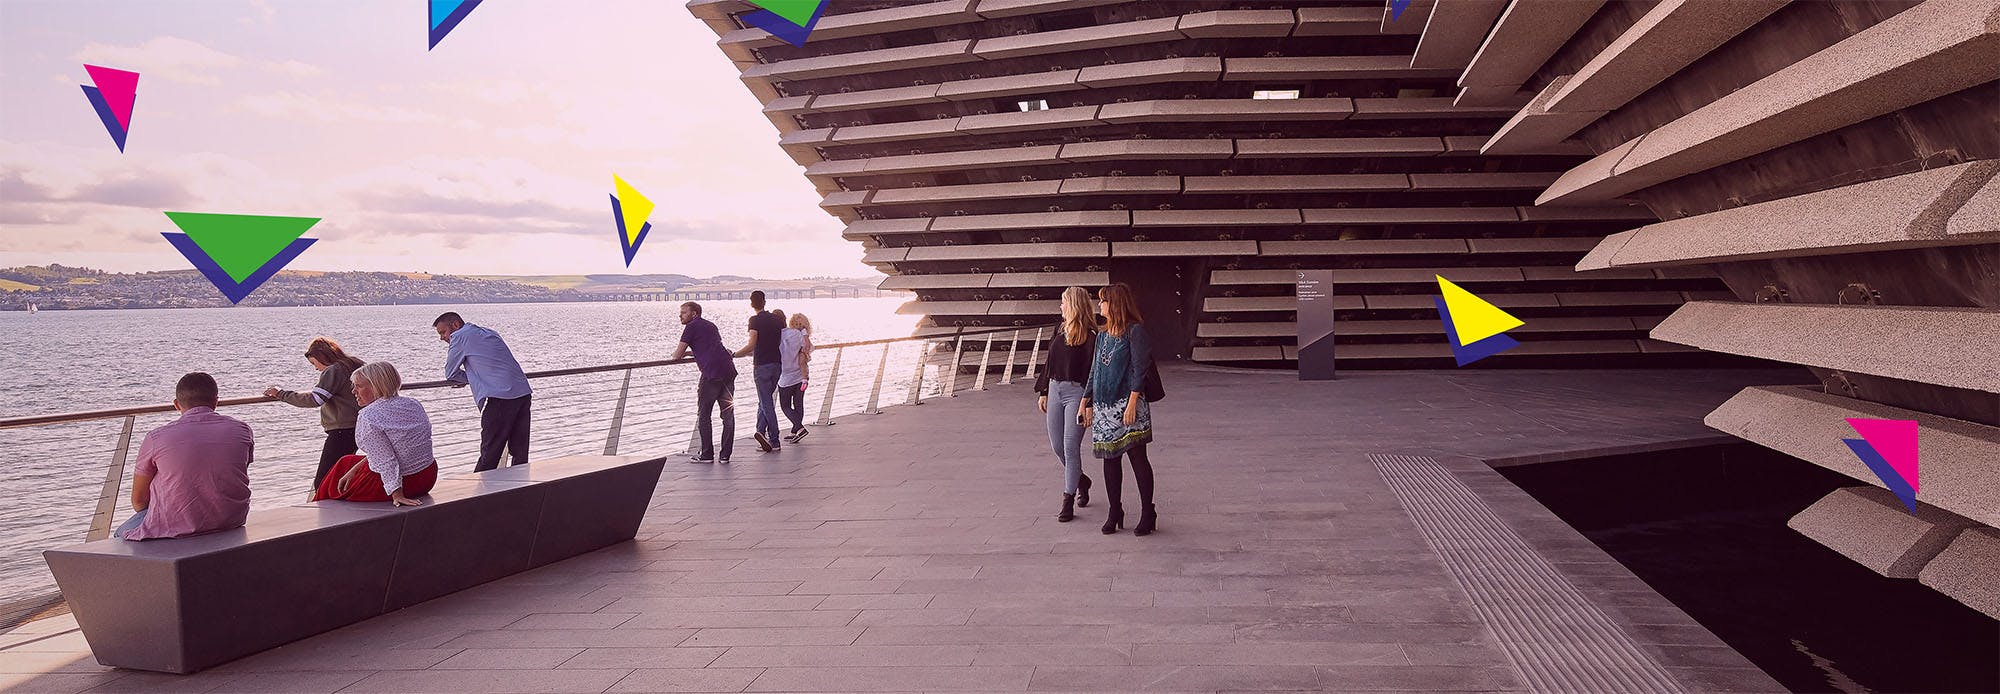 Photo of people enjoying the outside of V&A Dundee